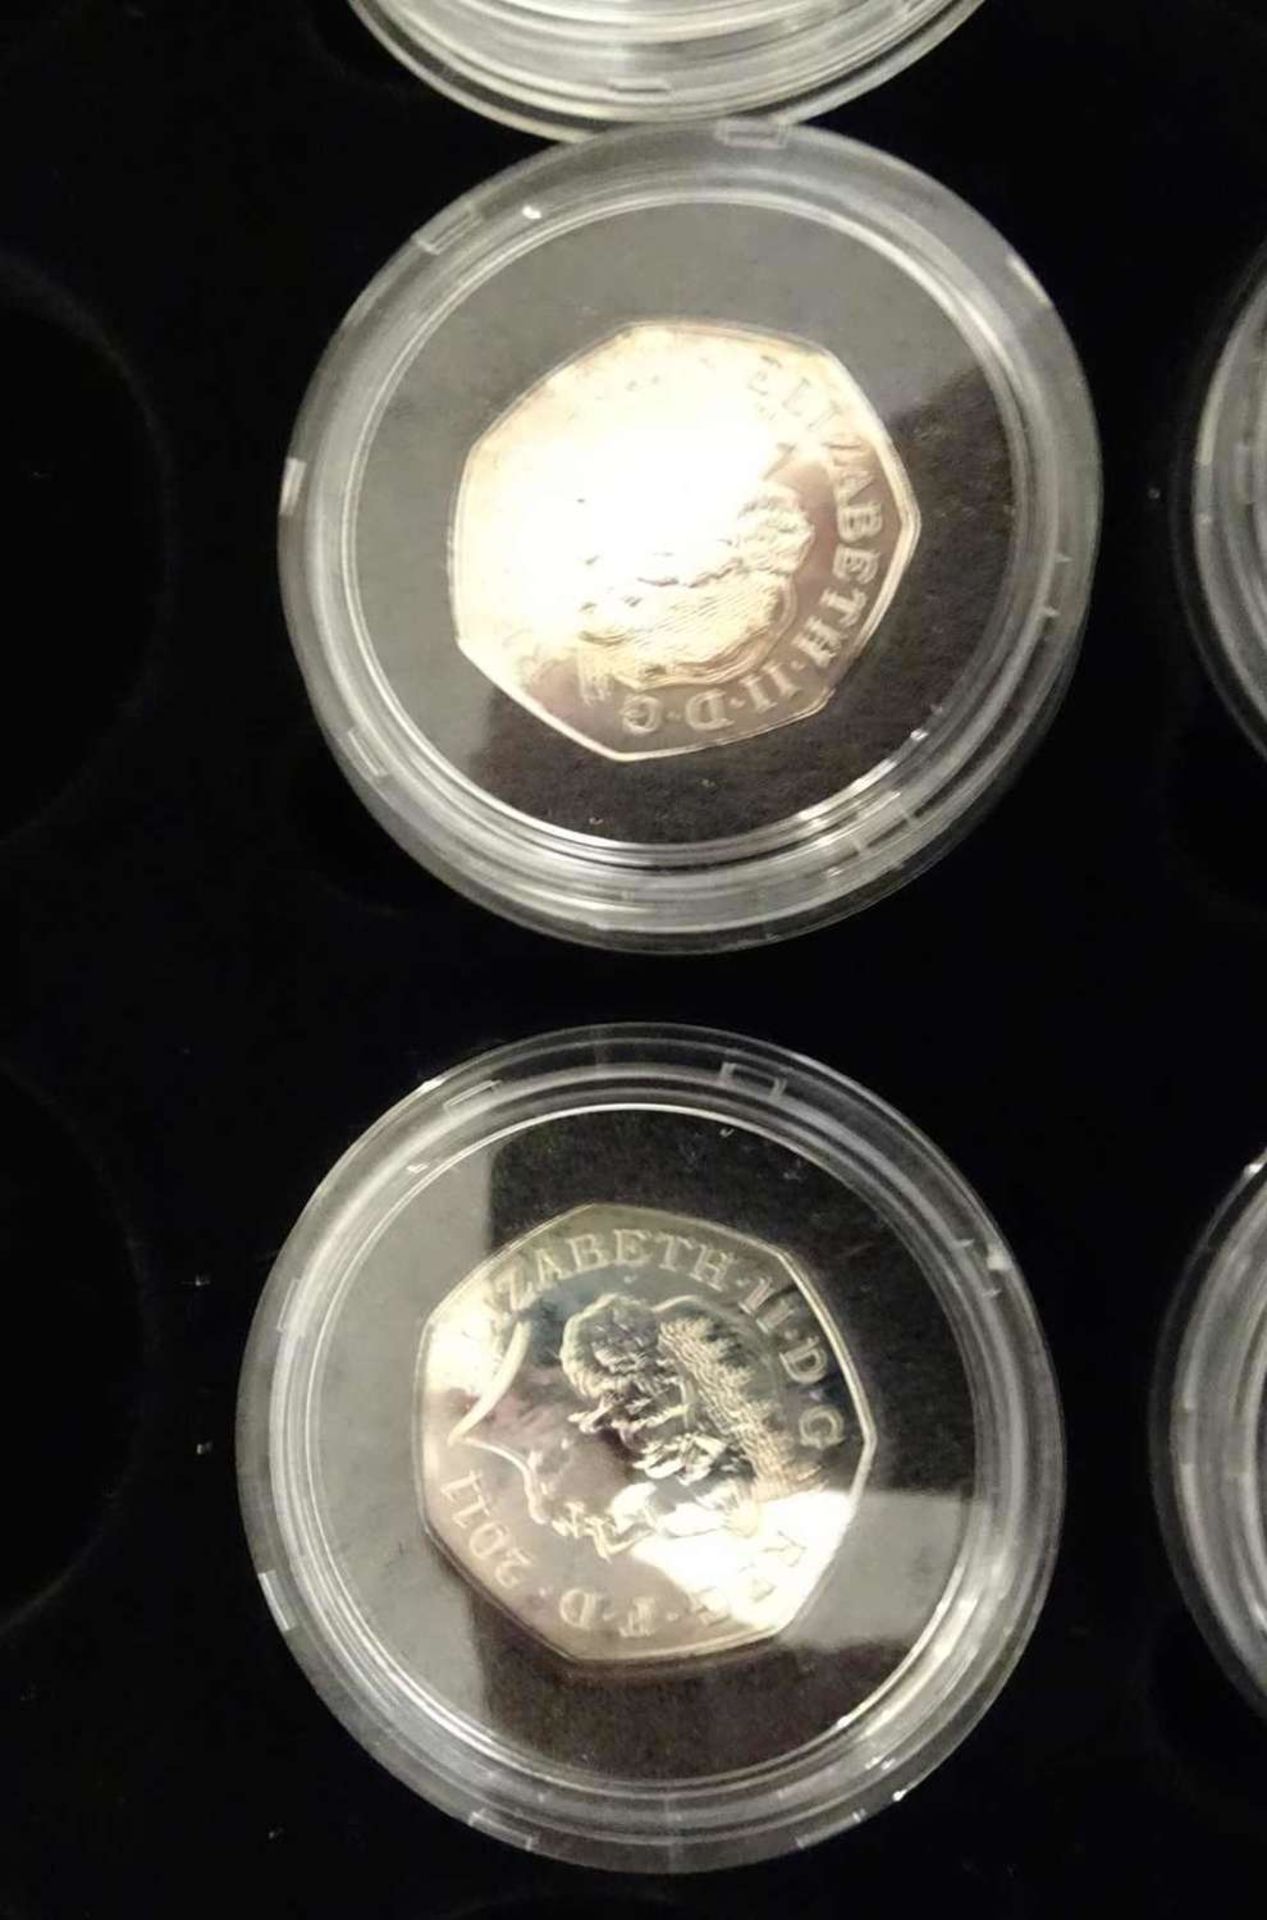 Lot of silver coins 2012 London Olympia Collection, 50p Silver coin. A total of 6 pieces, - Image 4 of 4